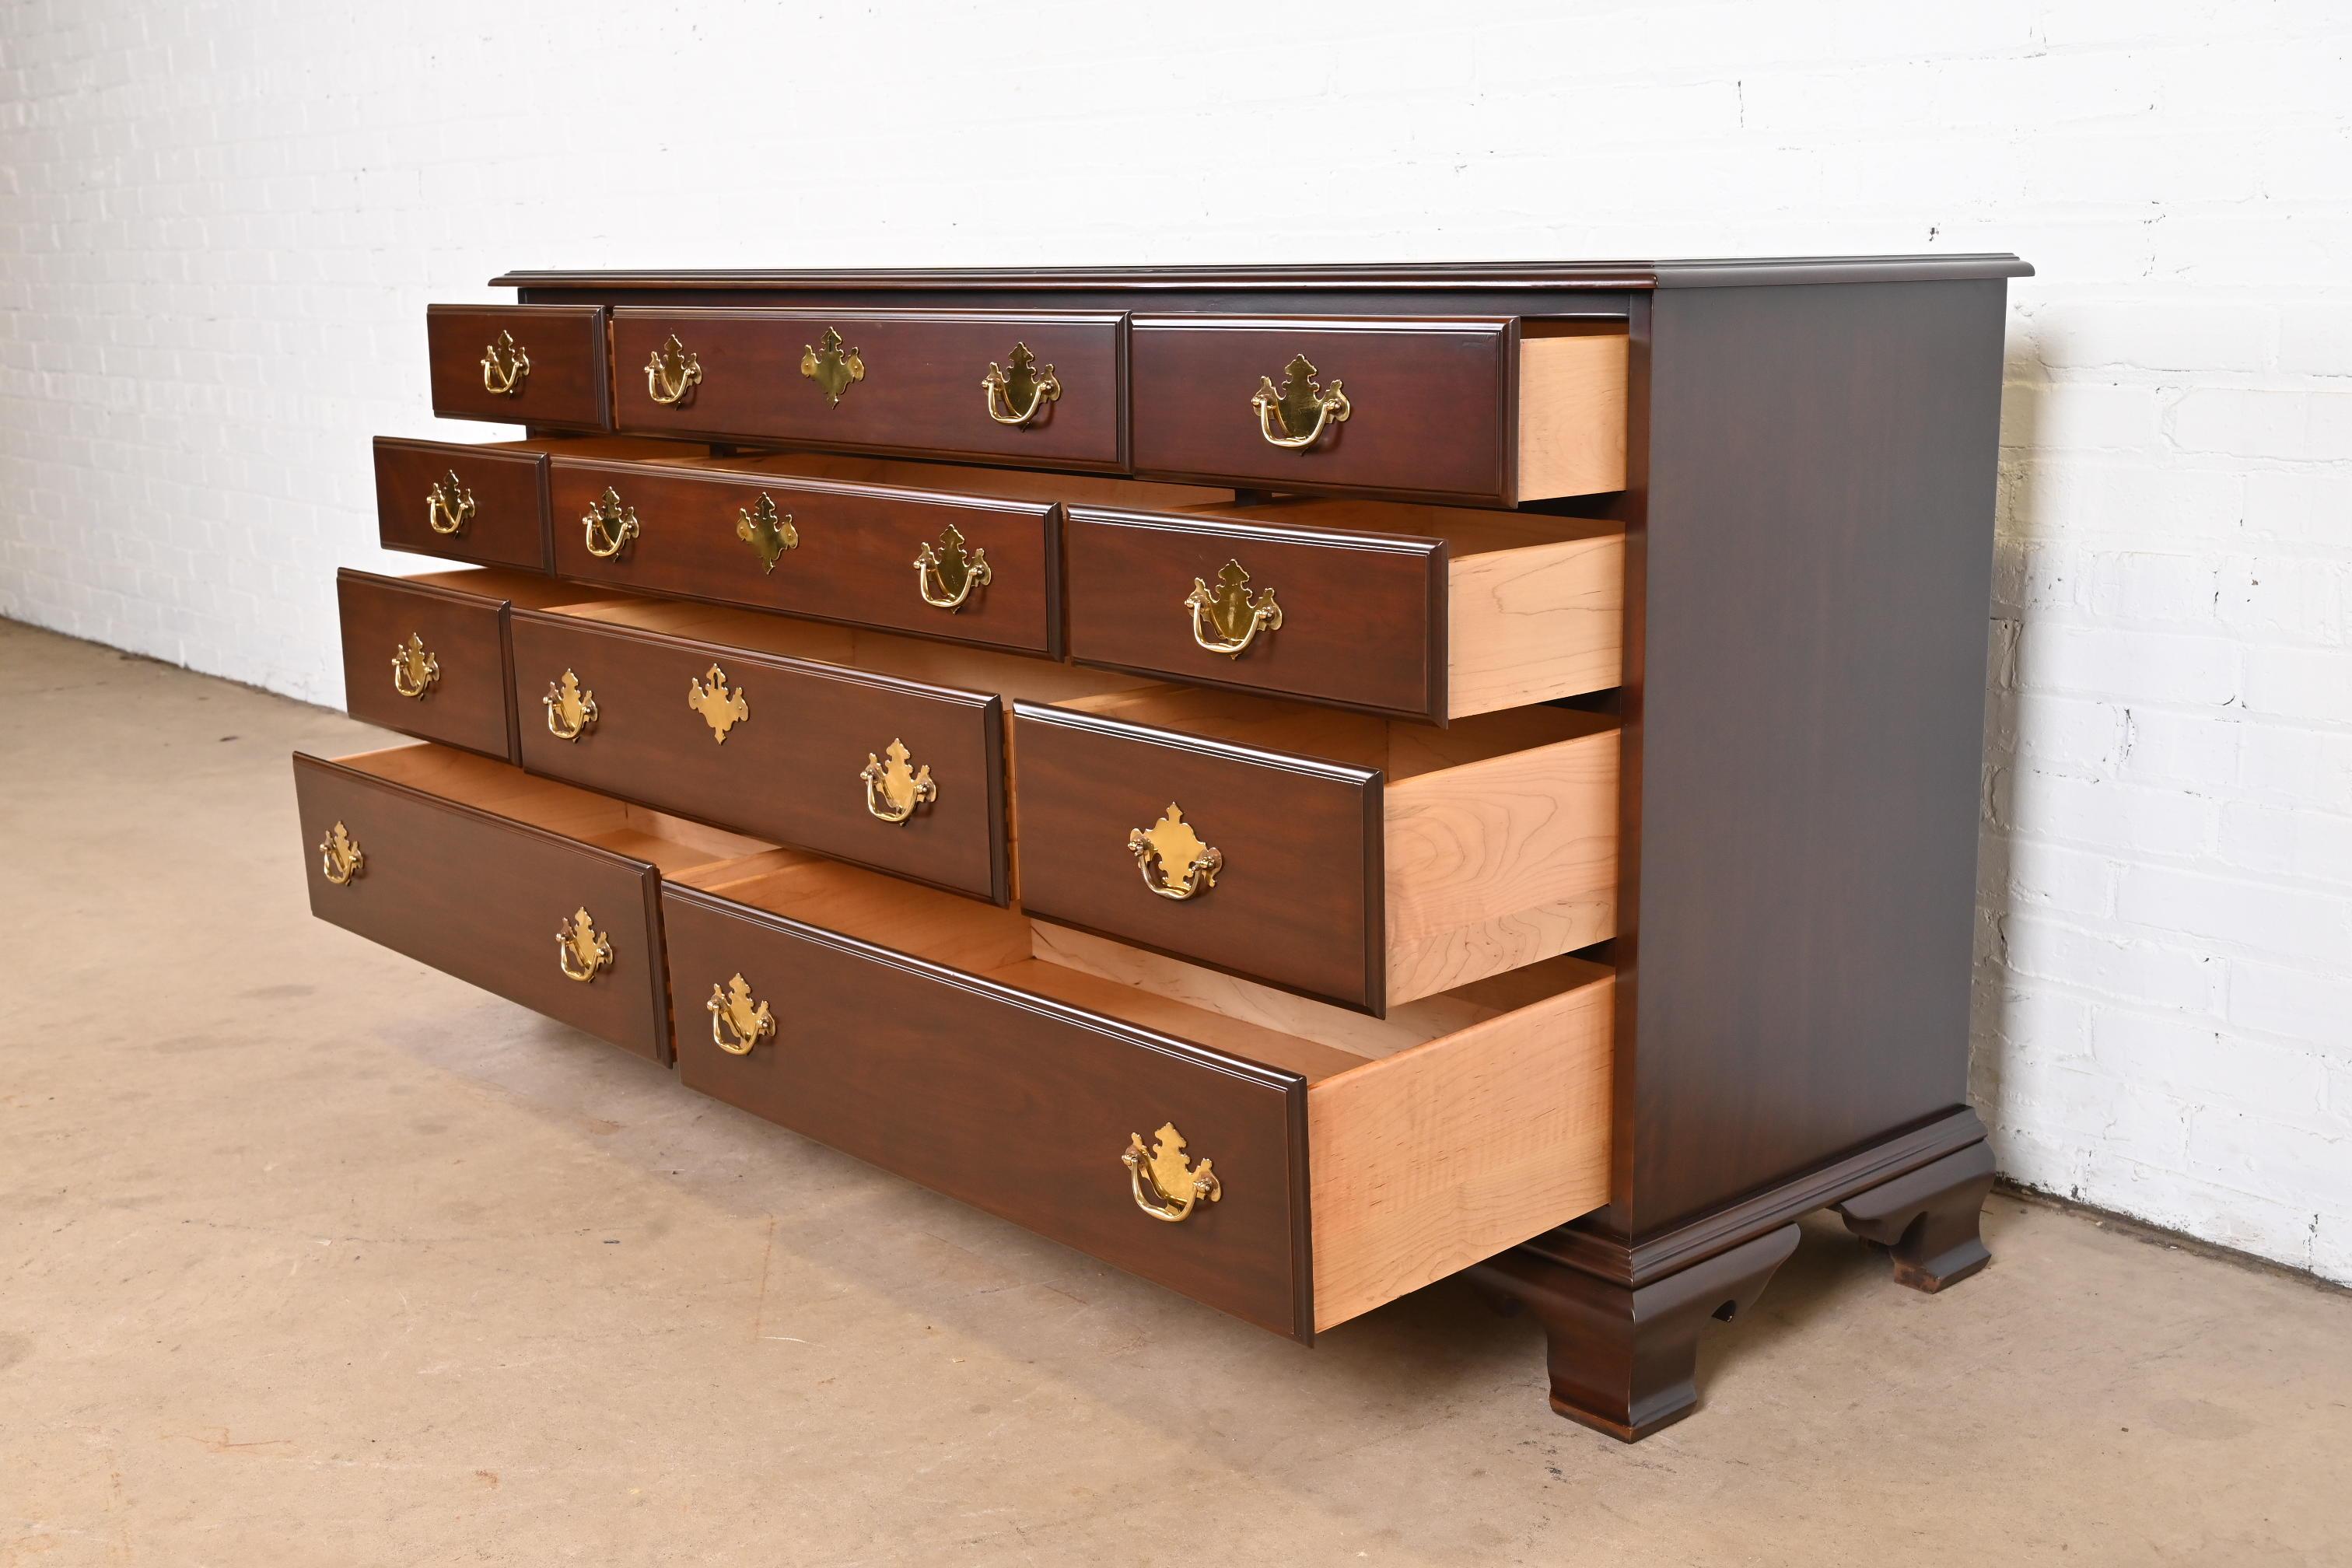 Brass Harden Furniture Georgian Carved Solid Cherry Wood Long Dresser, Newly Restored For Sale